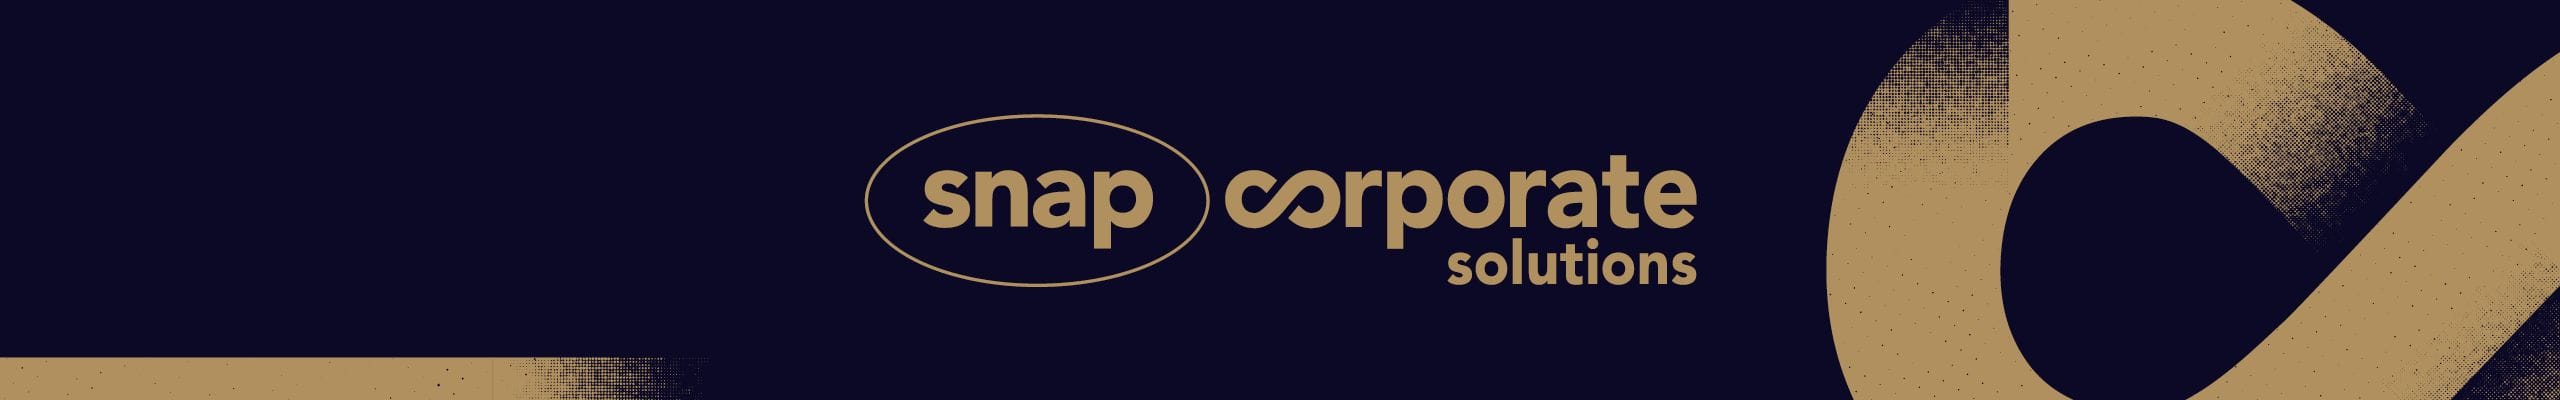 Snap Corporate Solutions